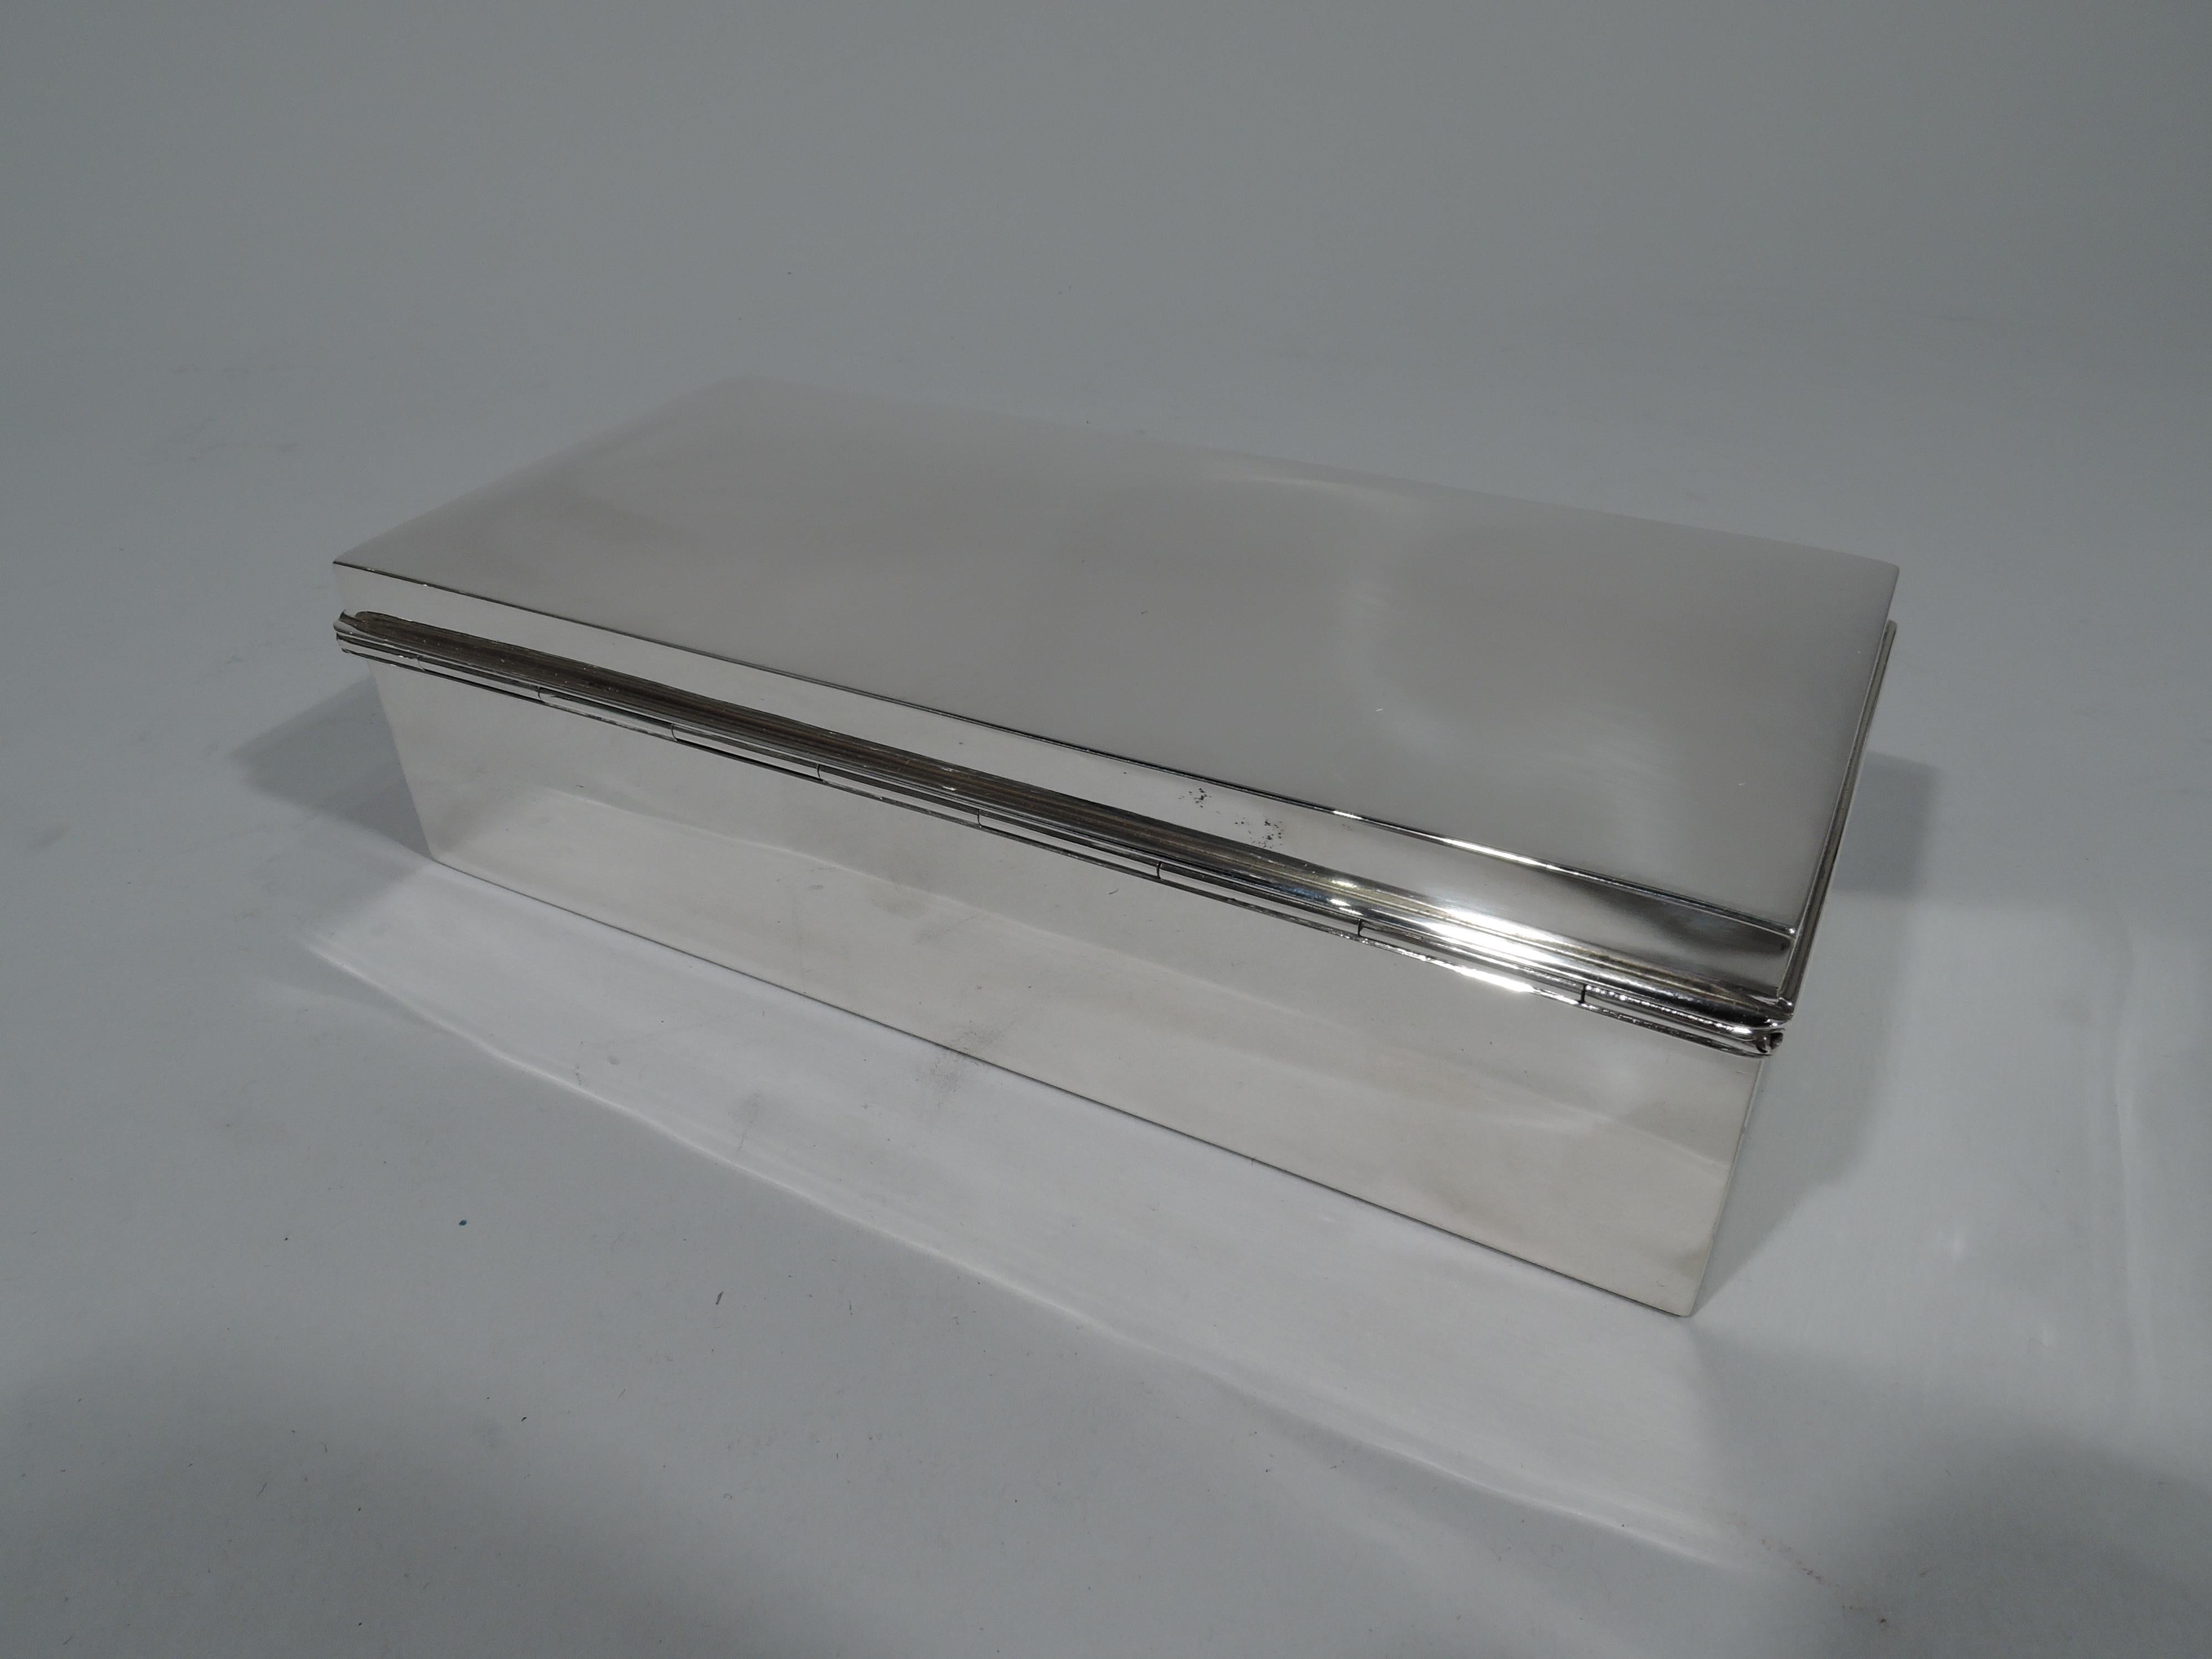 Modern sterling silver box. Made by Tiffany & Co. in New York. Rectangular with straight sides. Cover hinged and gently curved with molded rim. Box interior cedar lined. Cover interior gilt-washed. Hallmark includes pattern no. 18495 (first produced